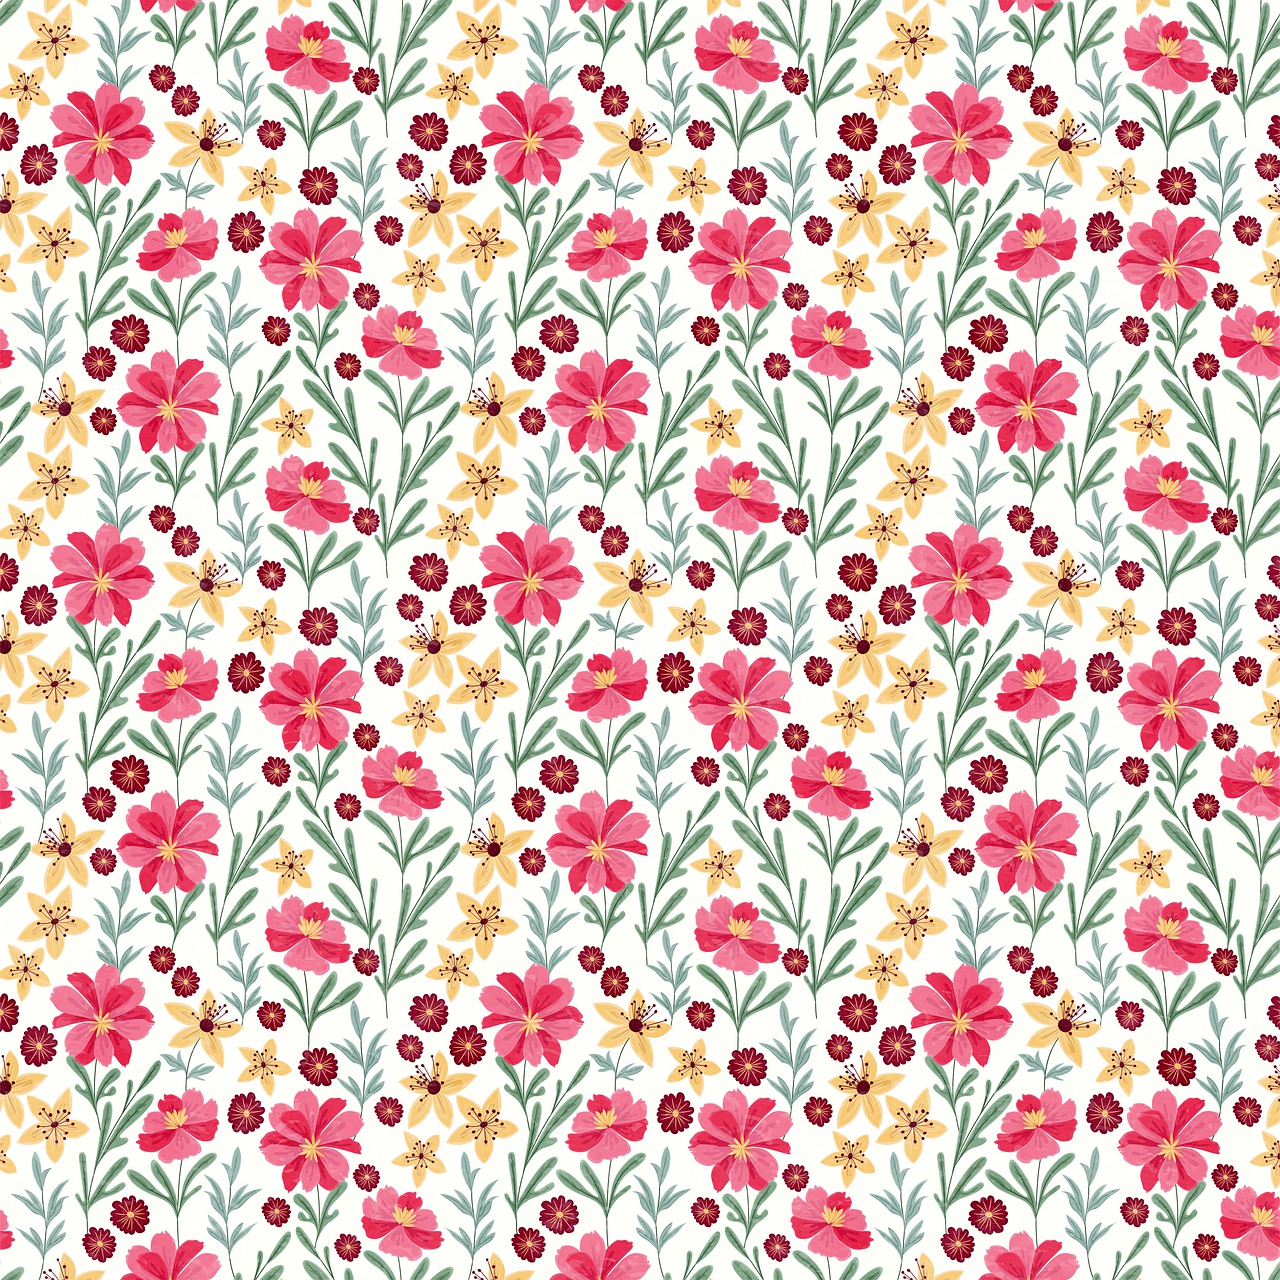 a red and yellow flower pattern on a white background, inspired by William Morris, naive art, field of pink flowers, miniature cosmos, boissb - blanca. j, no watermarks